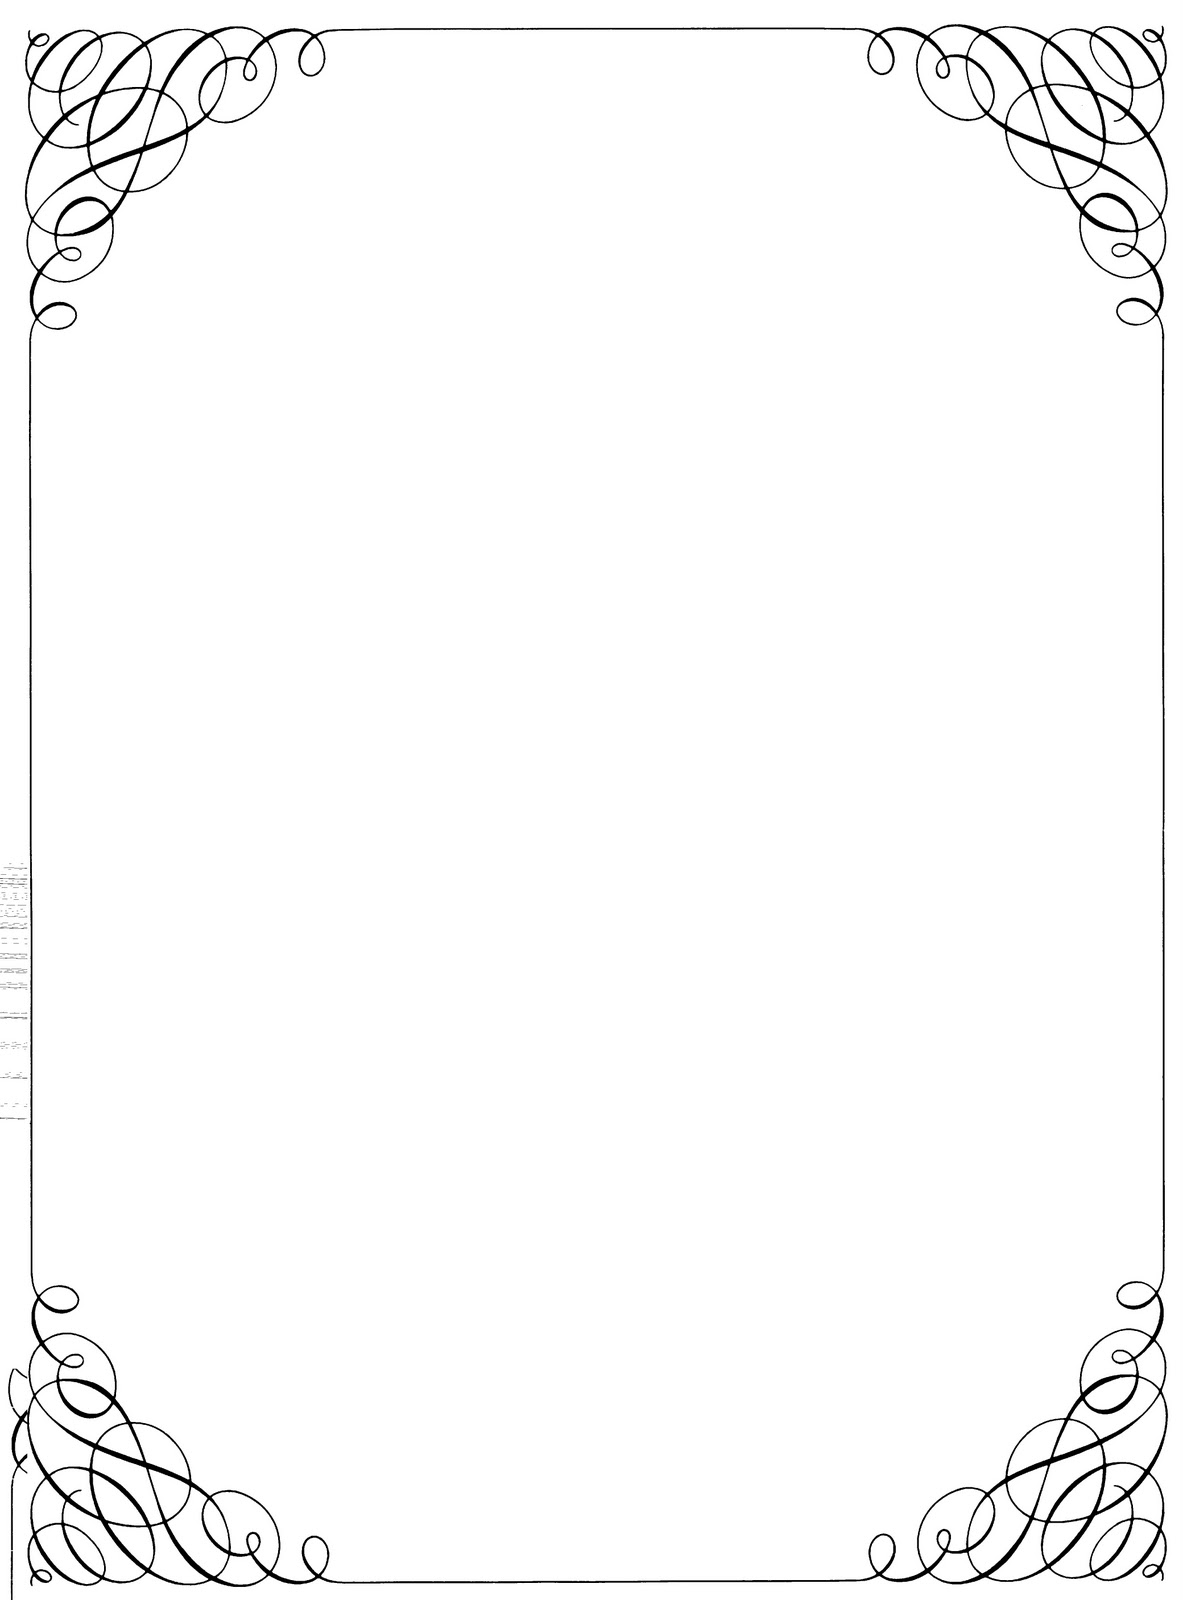 Free downloadable clip art borders 1 new hd template